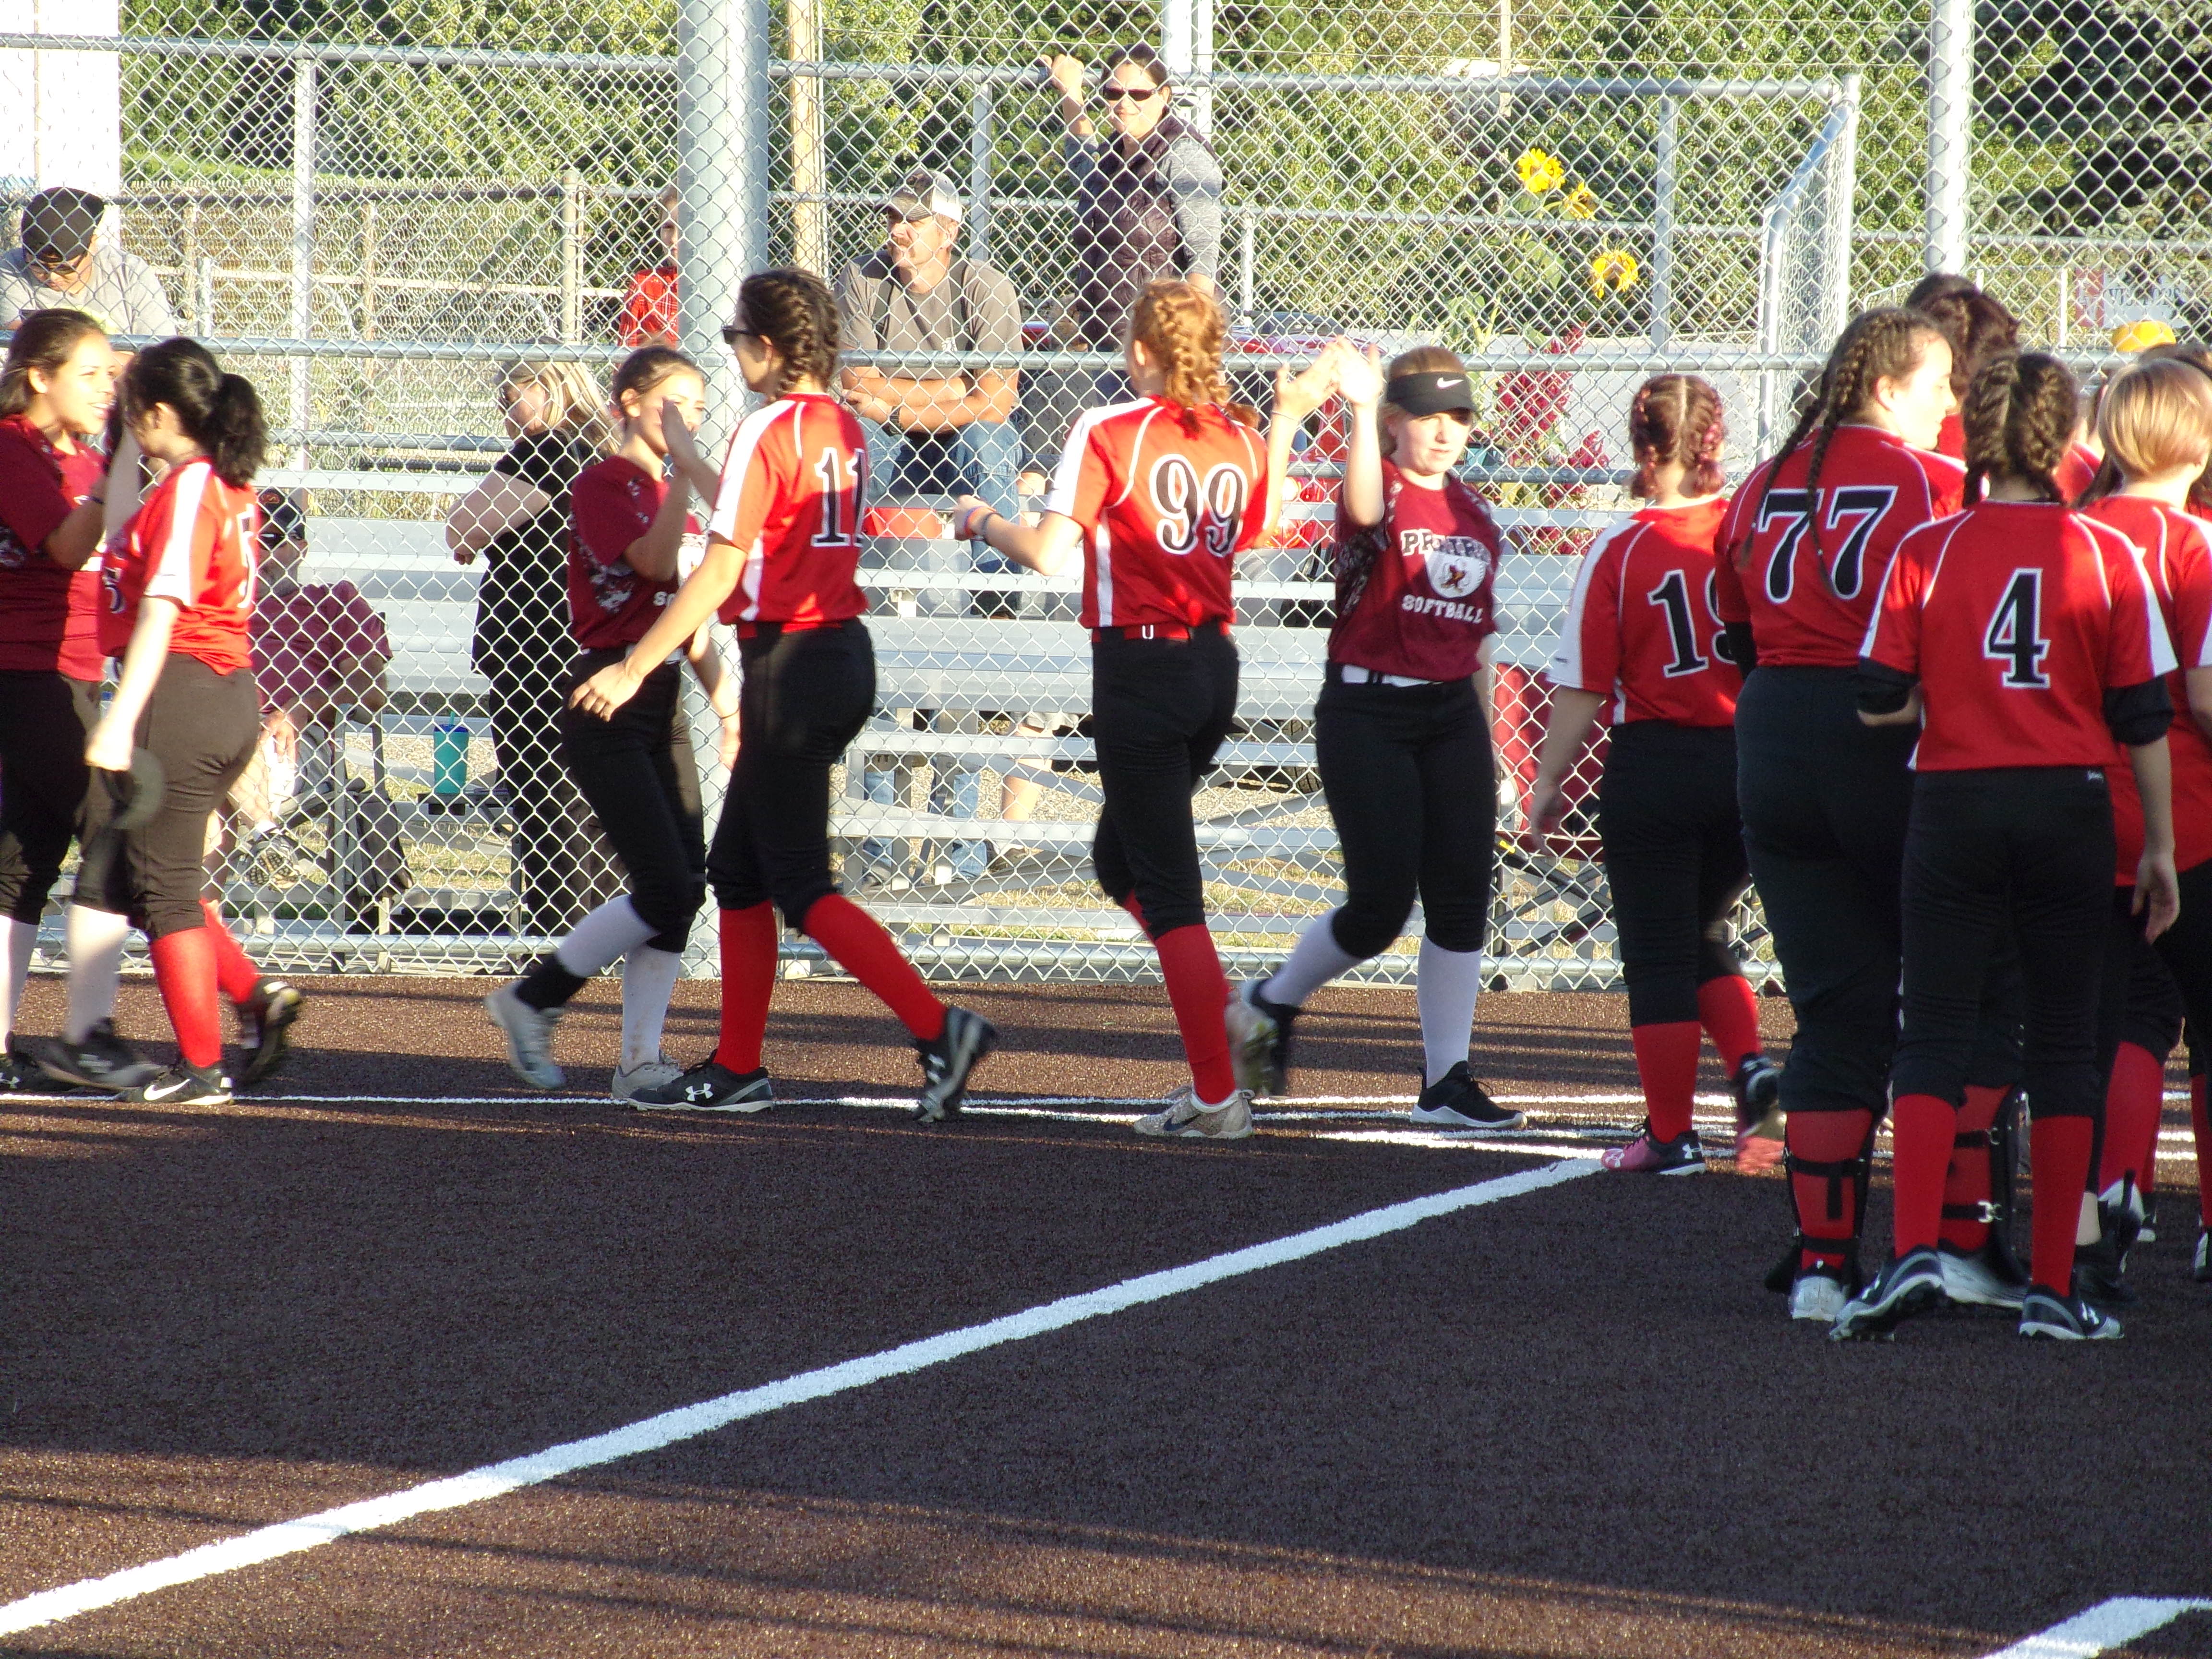 The Fort Vancouver slowpitch softball team shakes hands with Prairie after the teams' doubleheader at Fort Vancouver on Wednesday, Sept., 11, 2019 (Tim Martinez/The Columbian)